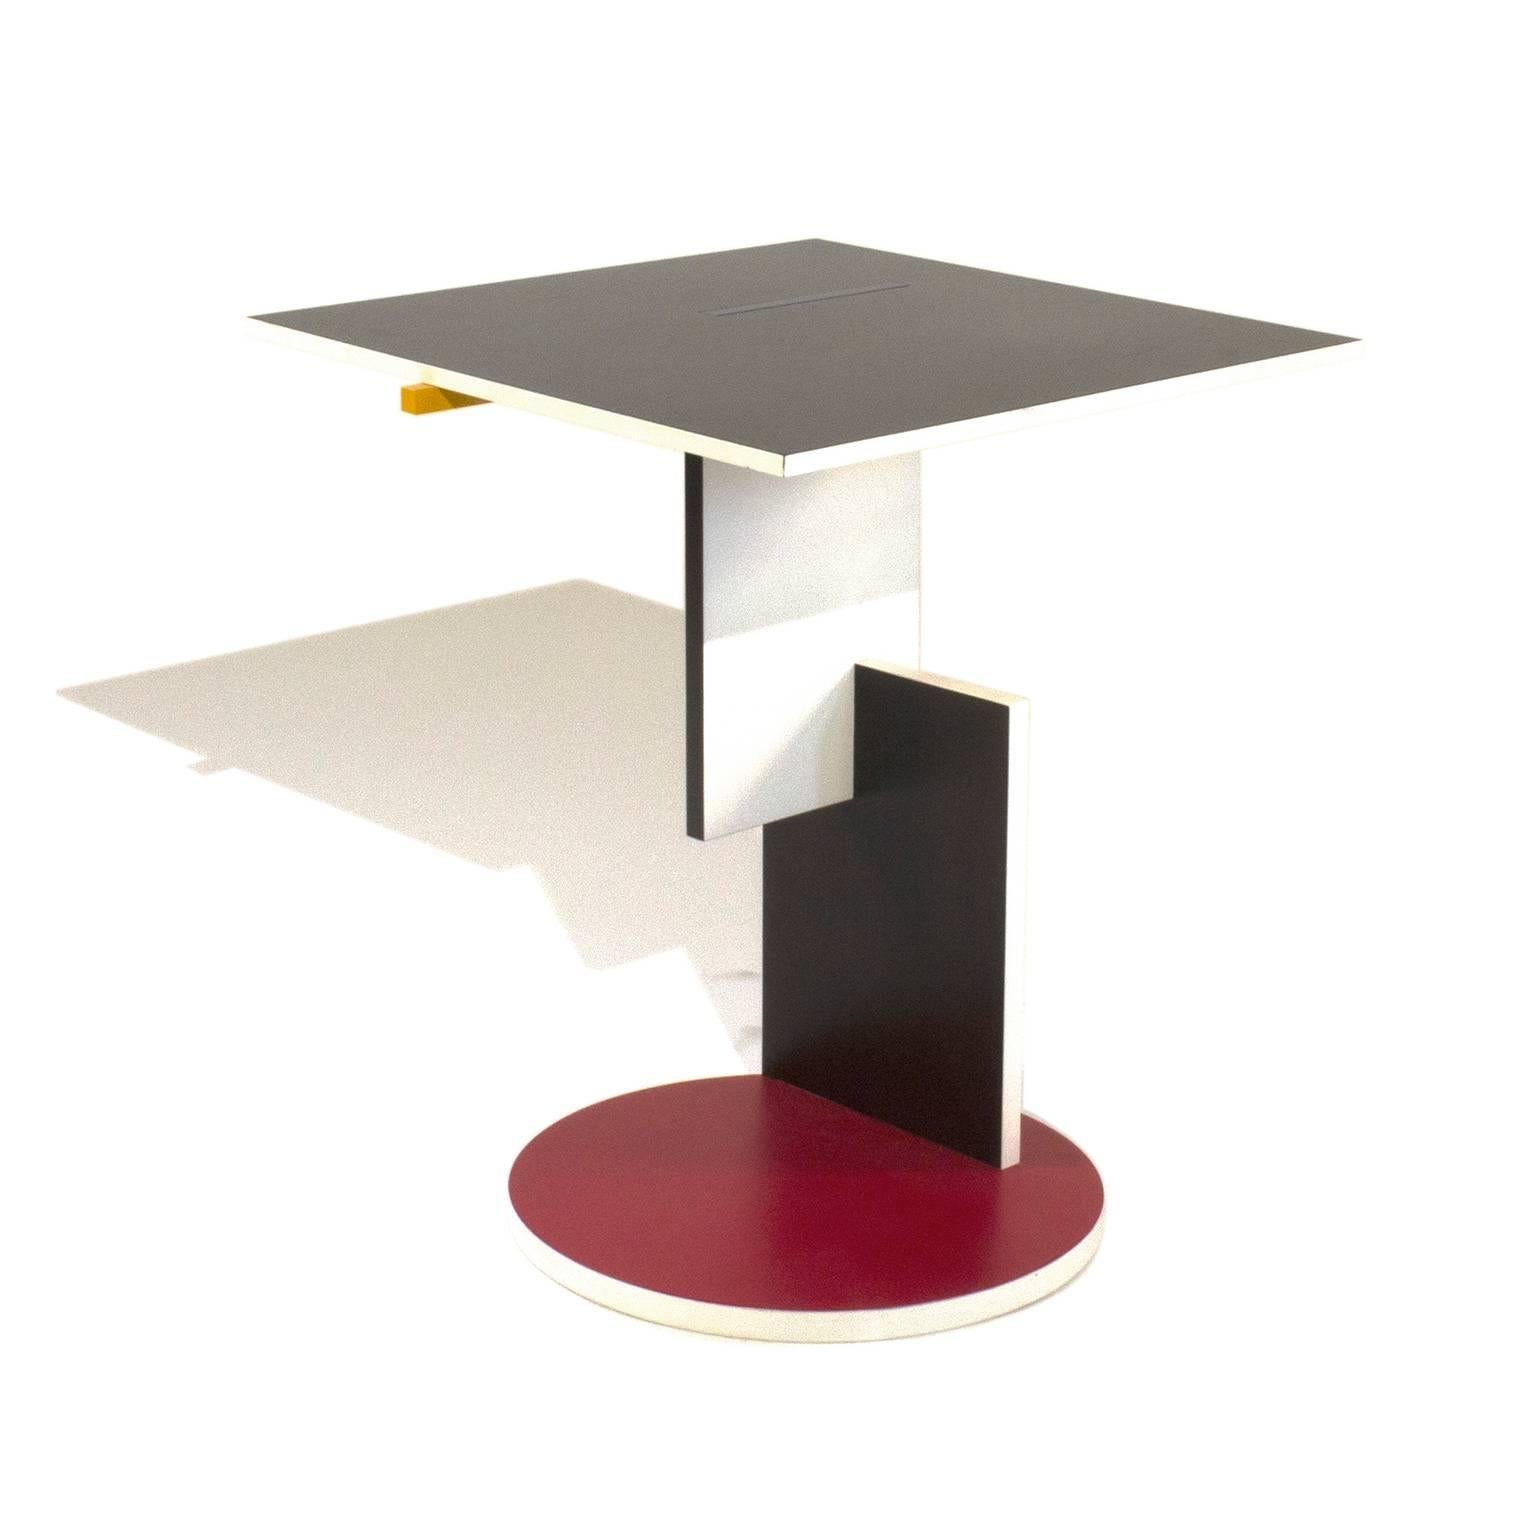 Early 20th Century Schroeder One Low Table by Gerrit Rietveld for Cassina, Italy For Sale